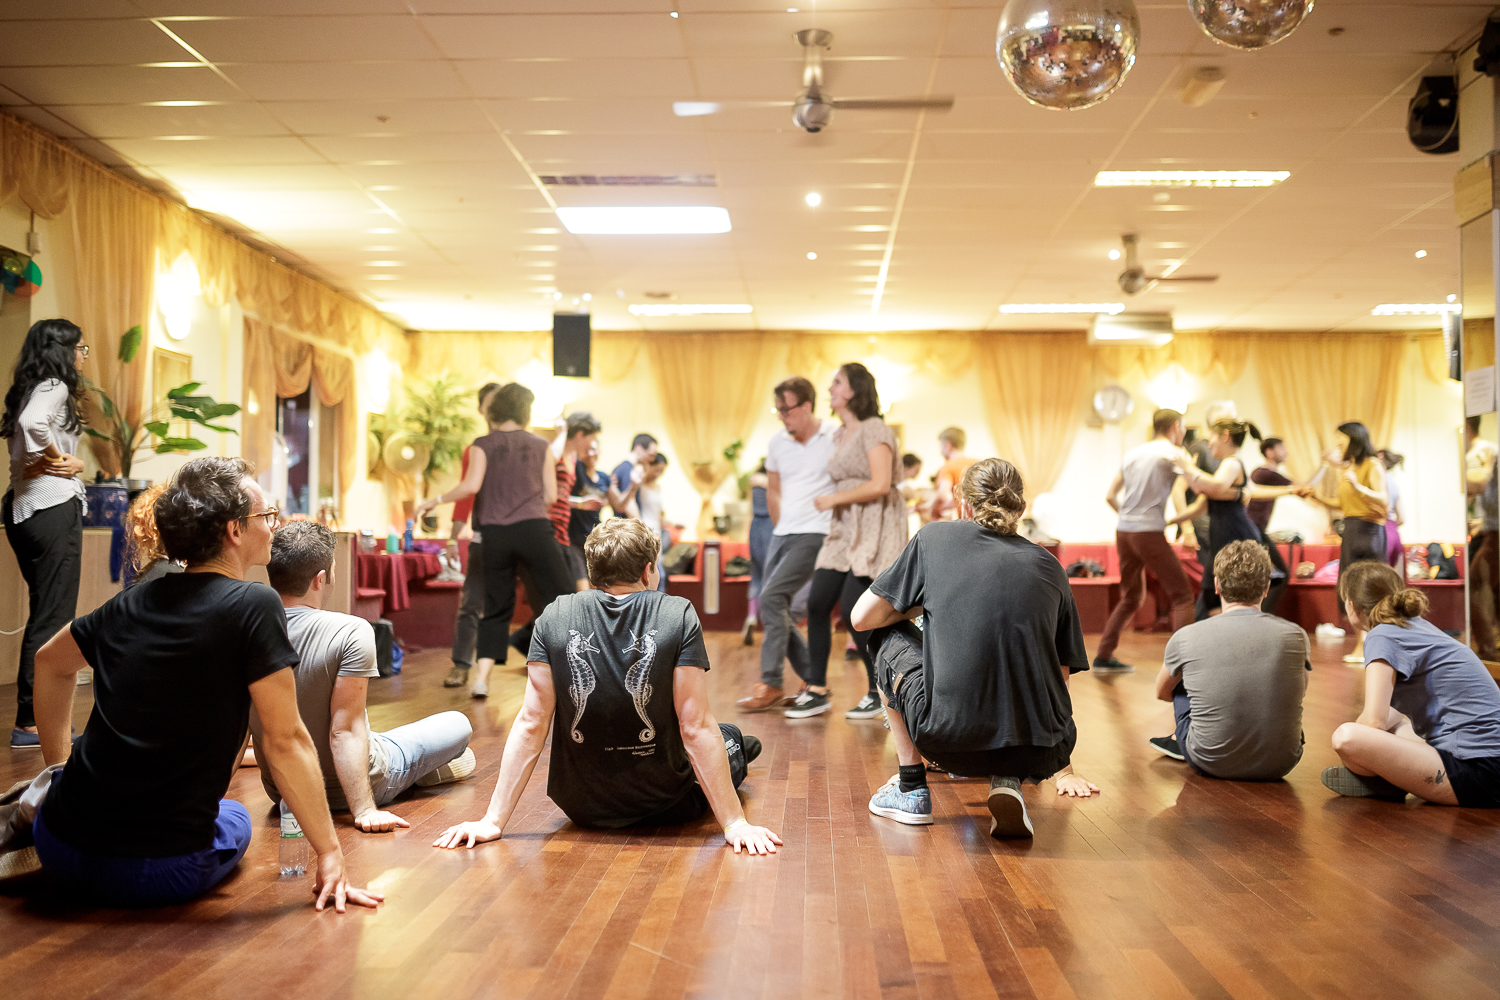  Ceuvel Swing Camp 2017 - Photo Credit: For Dancers Only (http://d.pr/1fEEY) - http://www.ebobrie.com/ceuvel-swing-camp-2017 